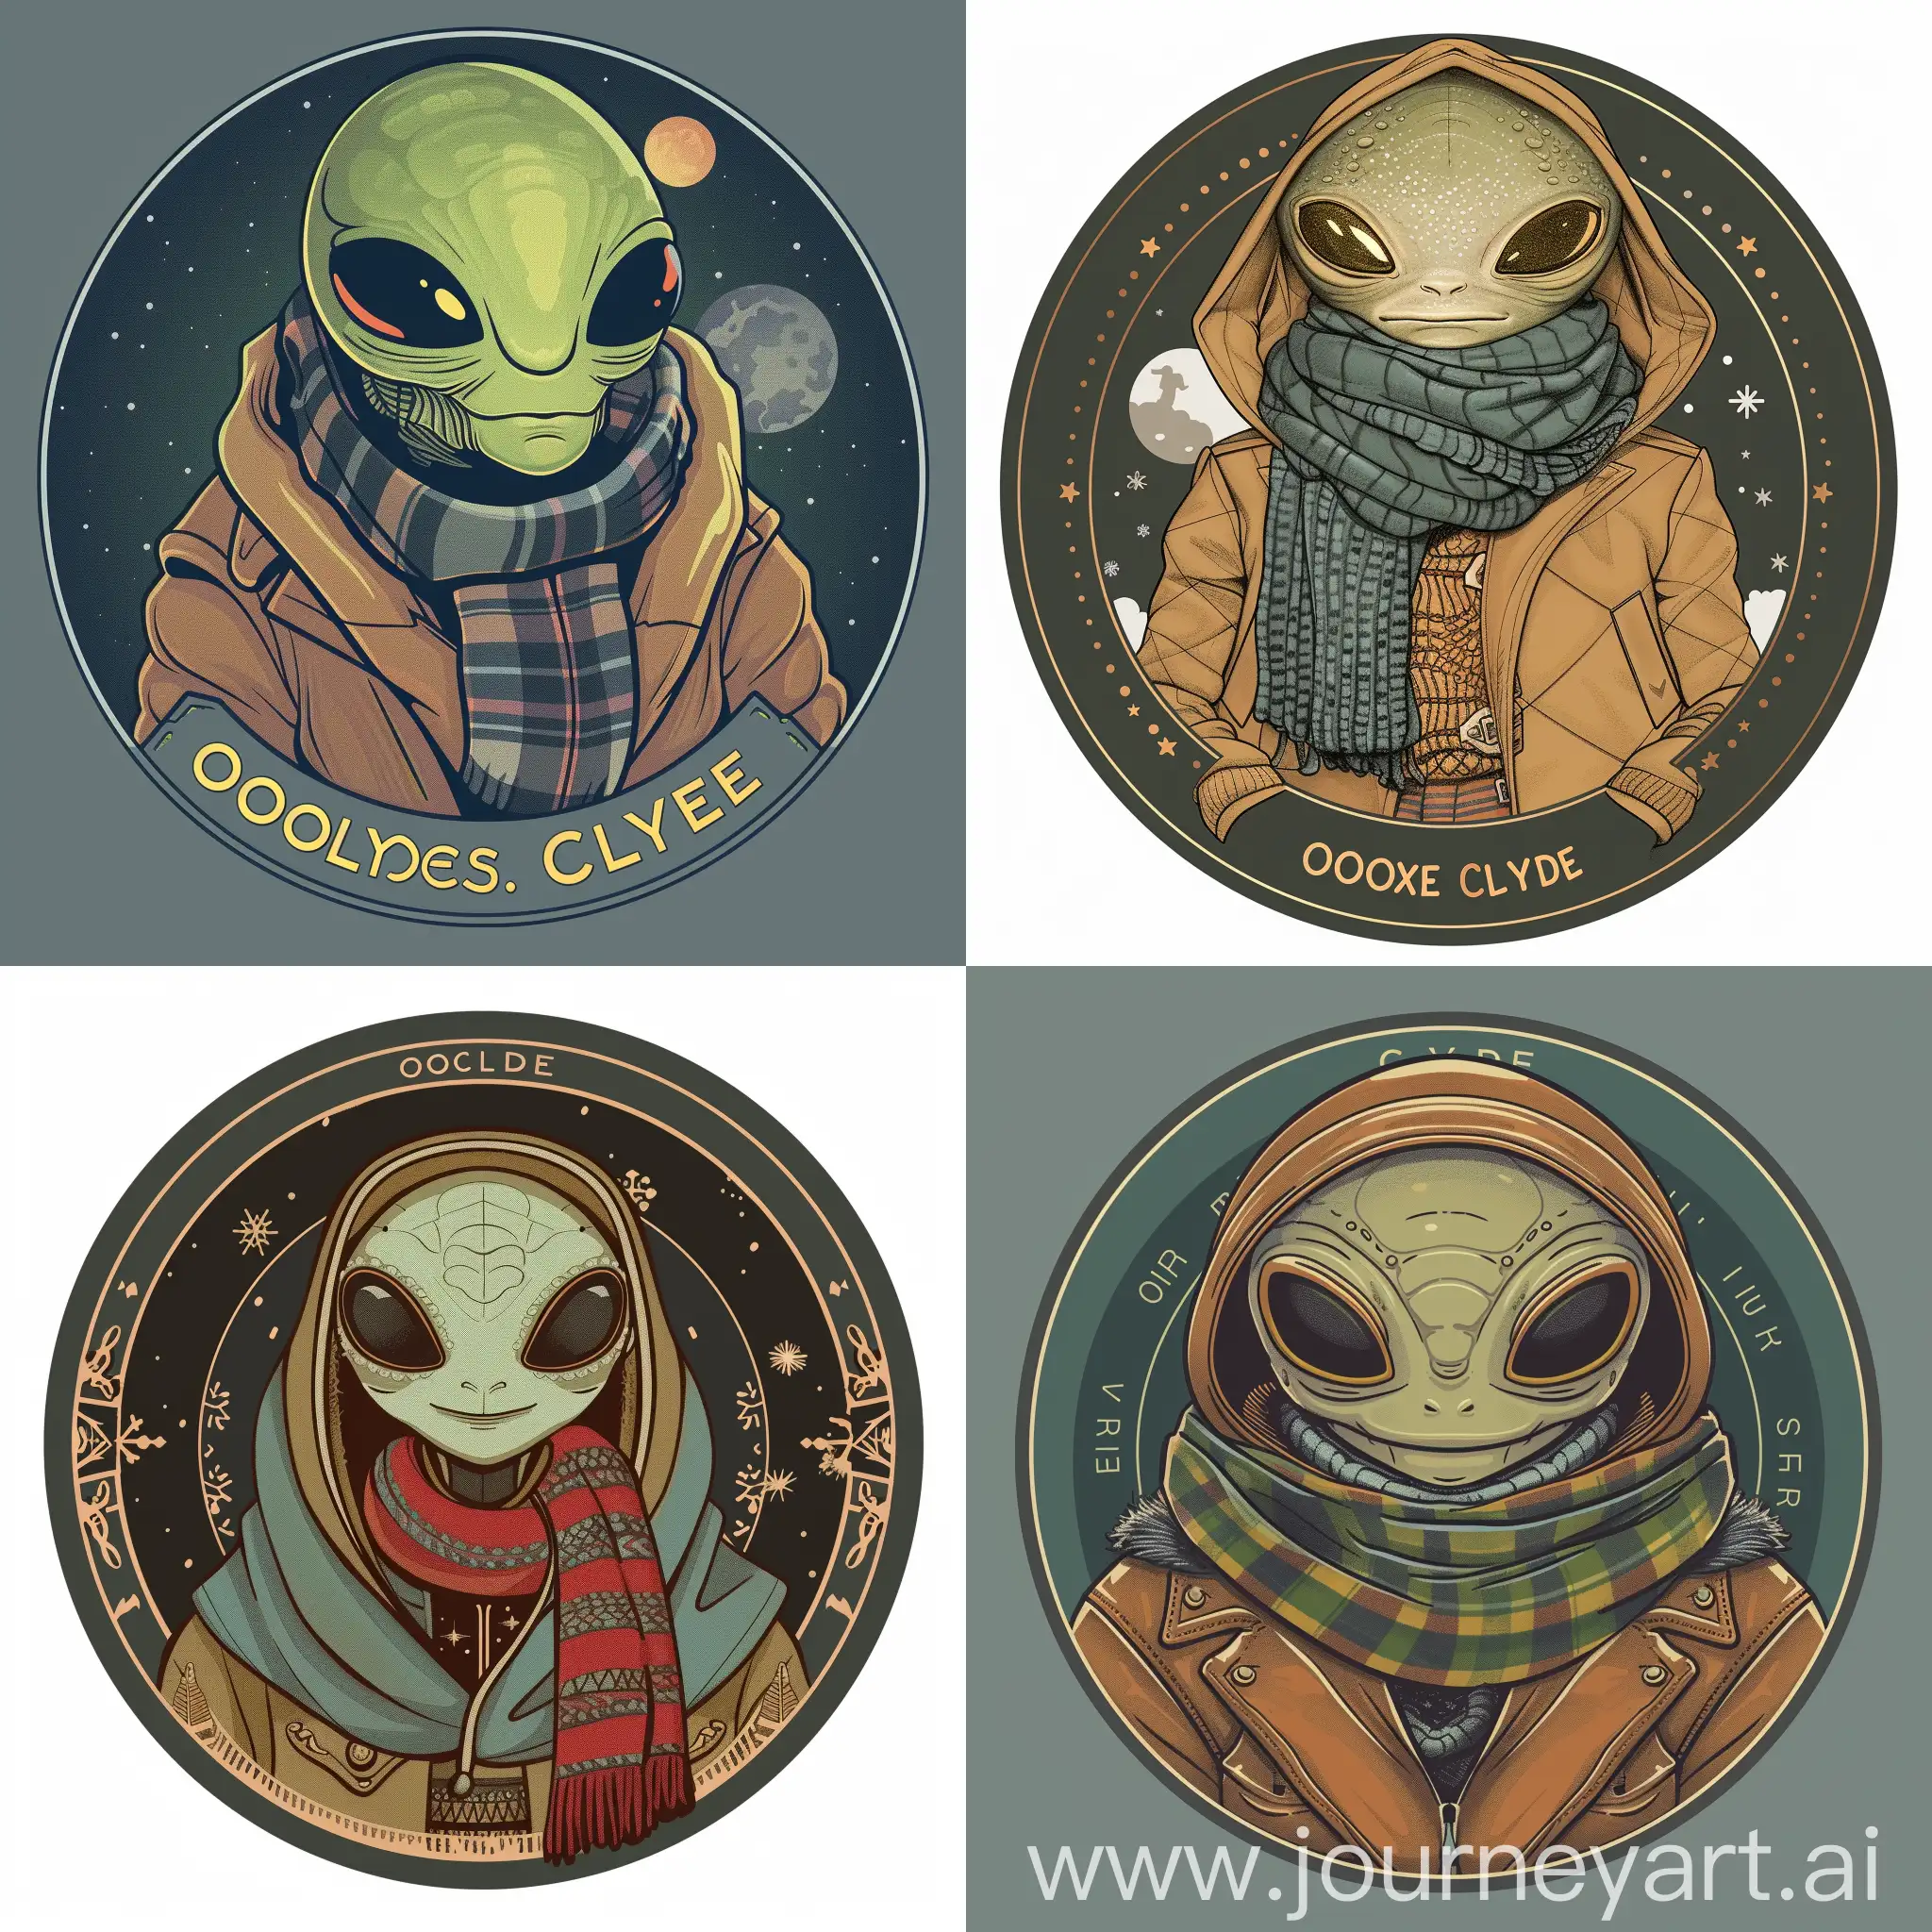 Let your imagination run wild with this prompt for Oracle Clyde's circular logo! Visualize the friendly Alien wearing a warm winter coat and scarf, with intricate details and stylistic rendering that brings the character to life in a unique and visually stunning way.